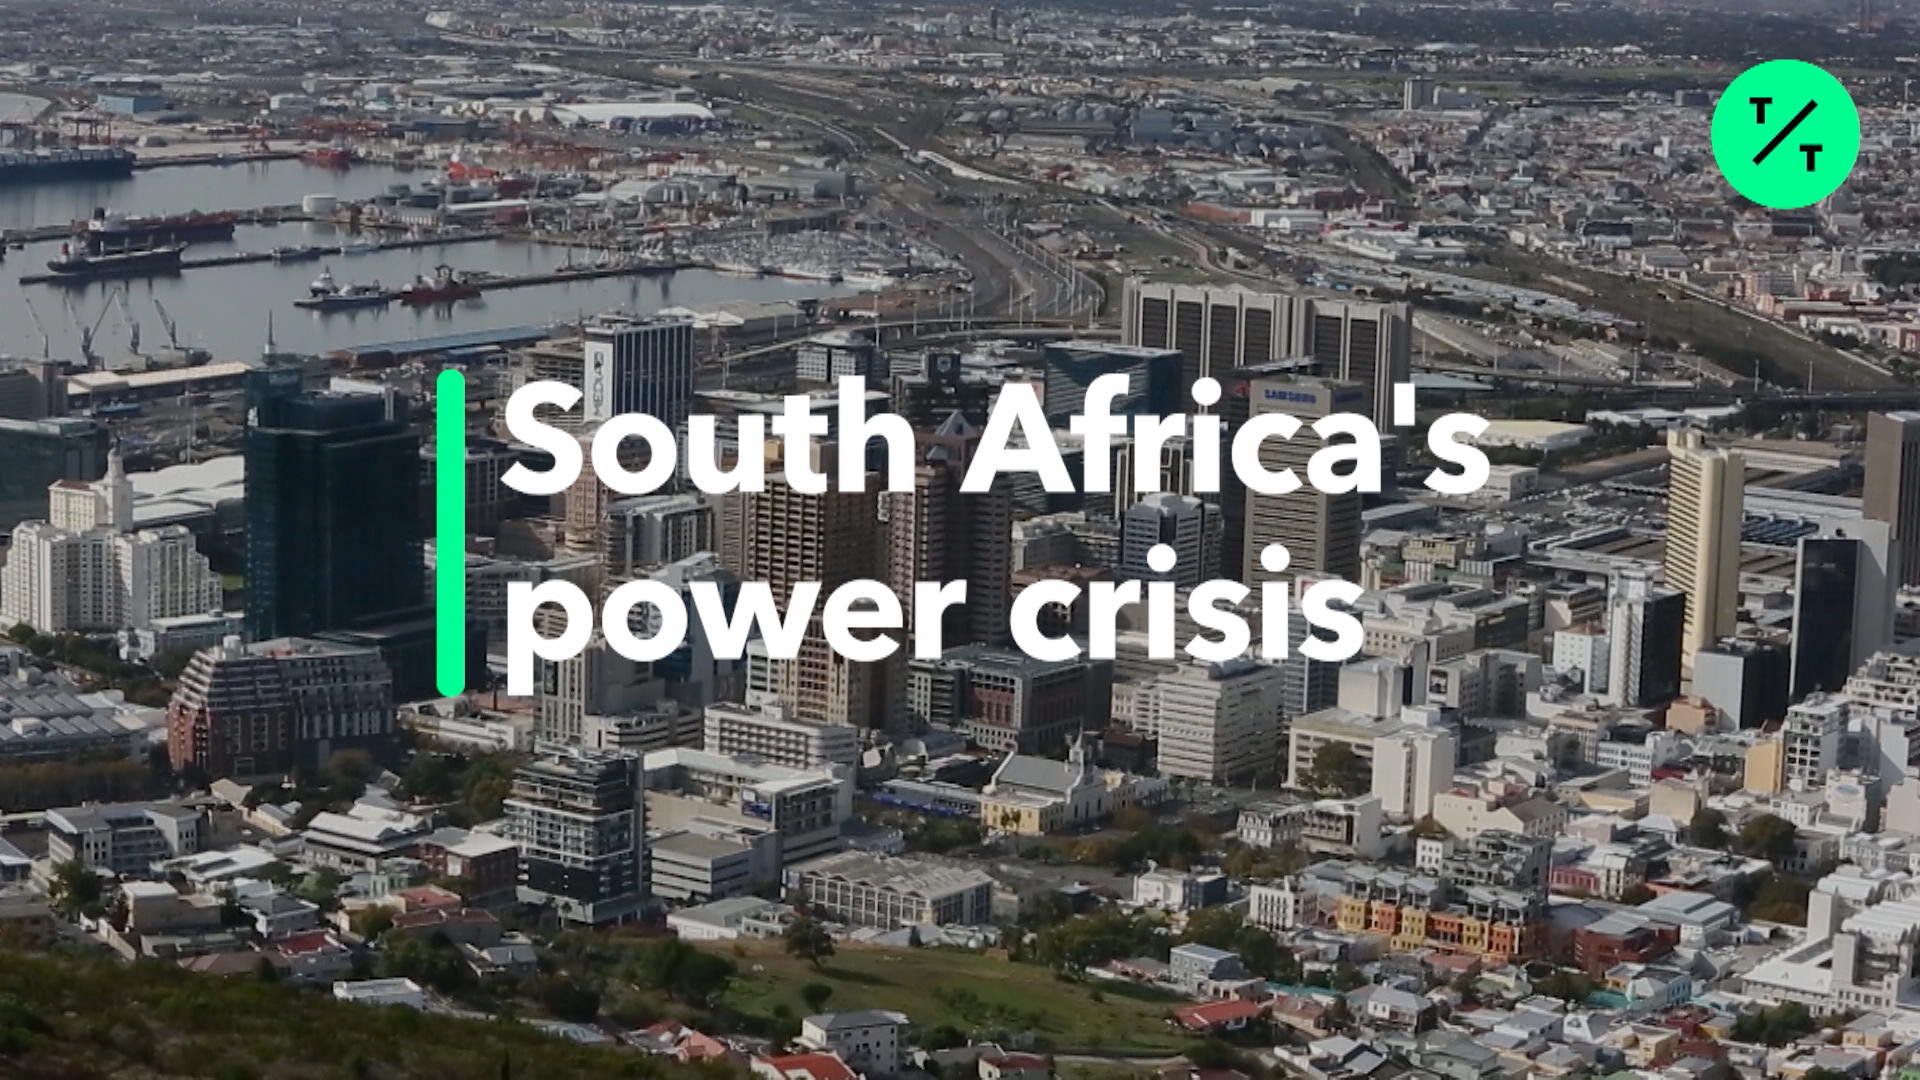 Blackouts Crippling South Africa Bloomberg